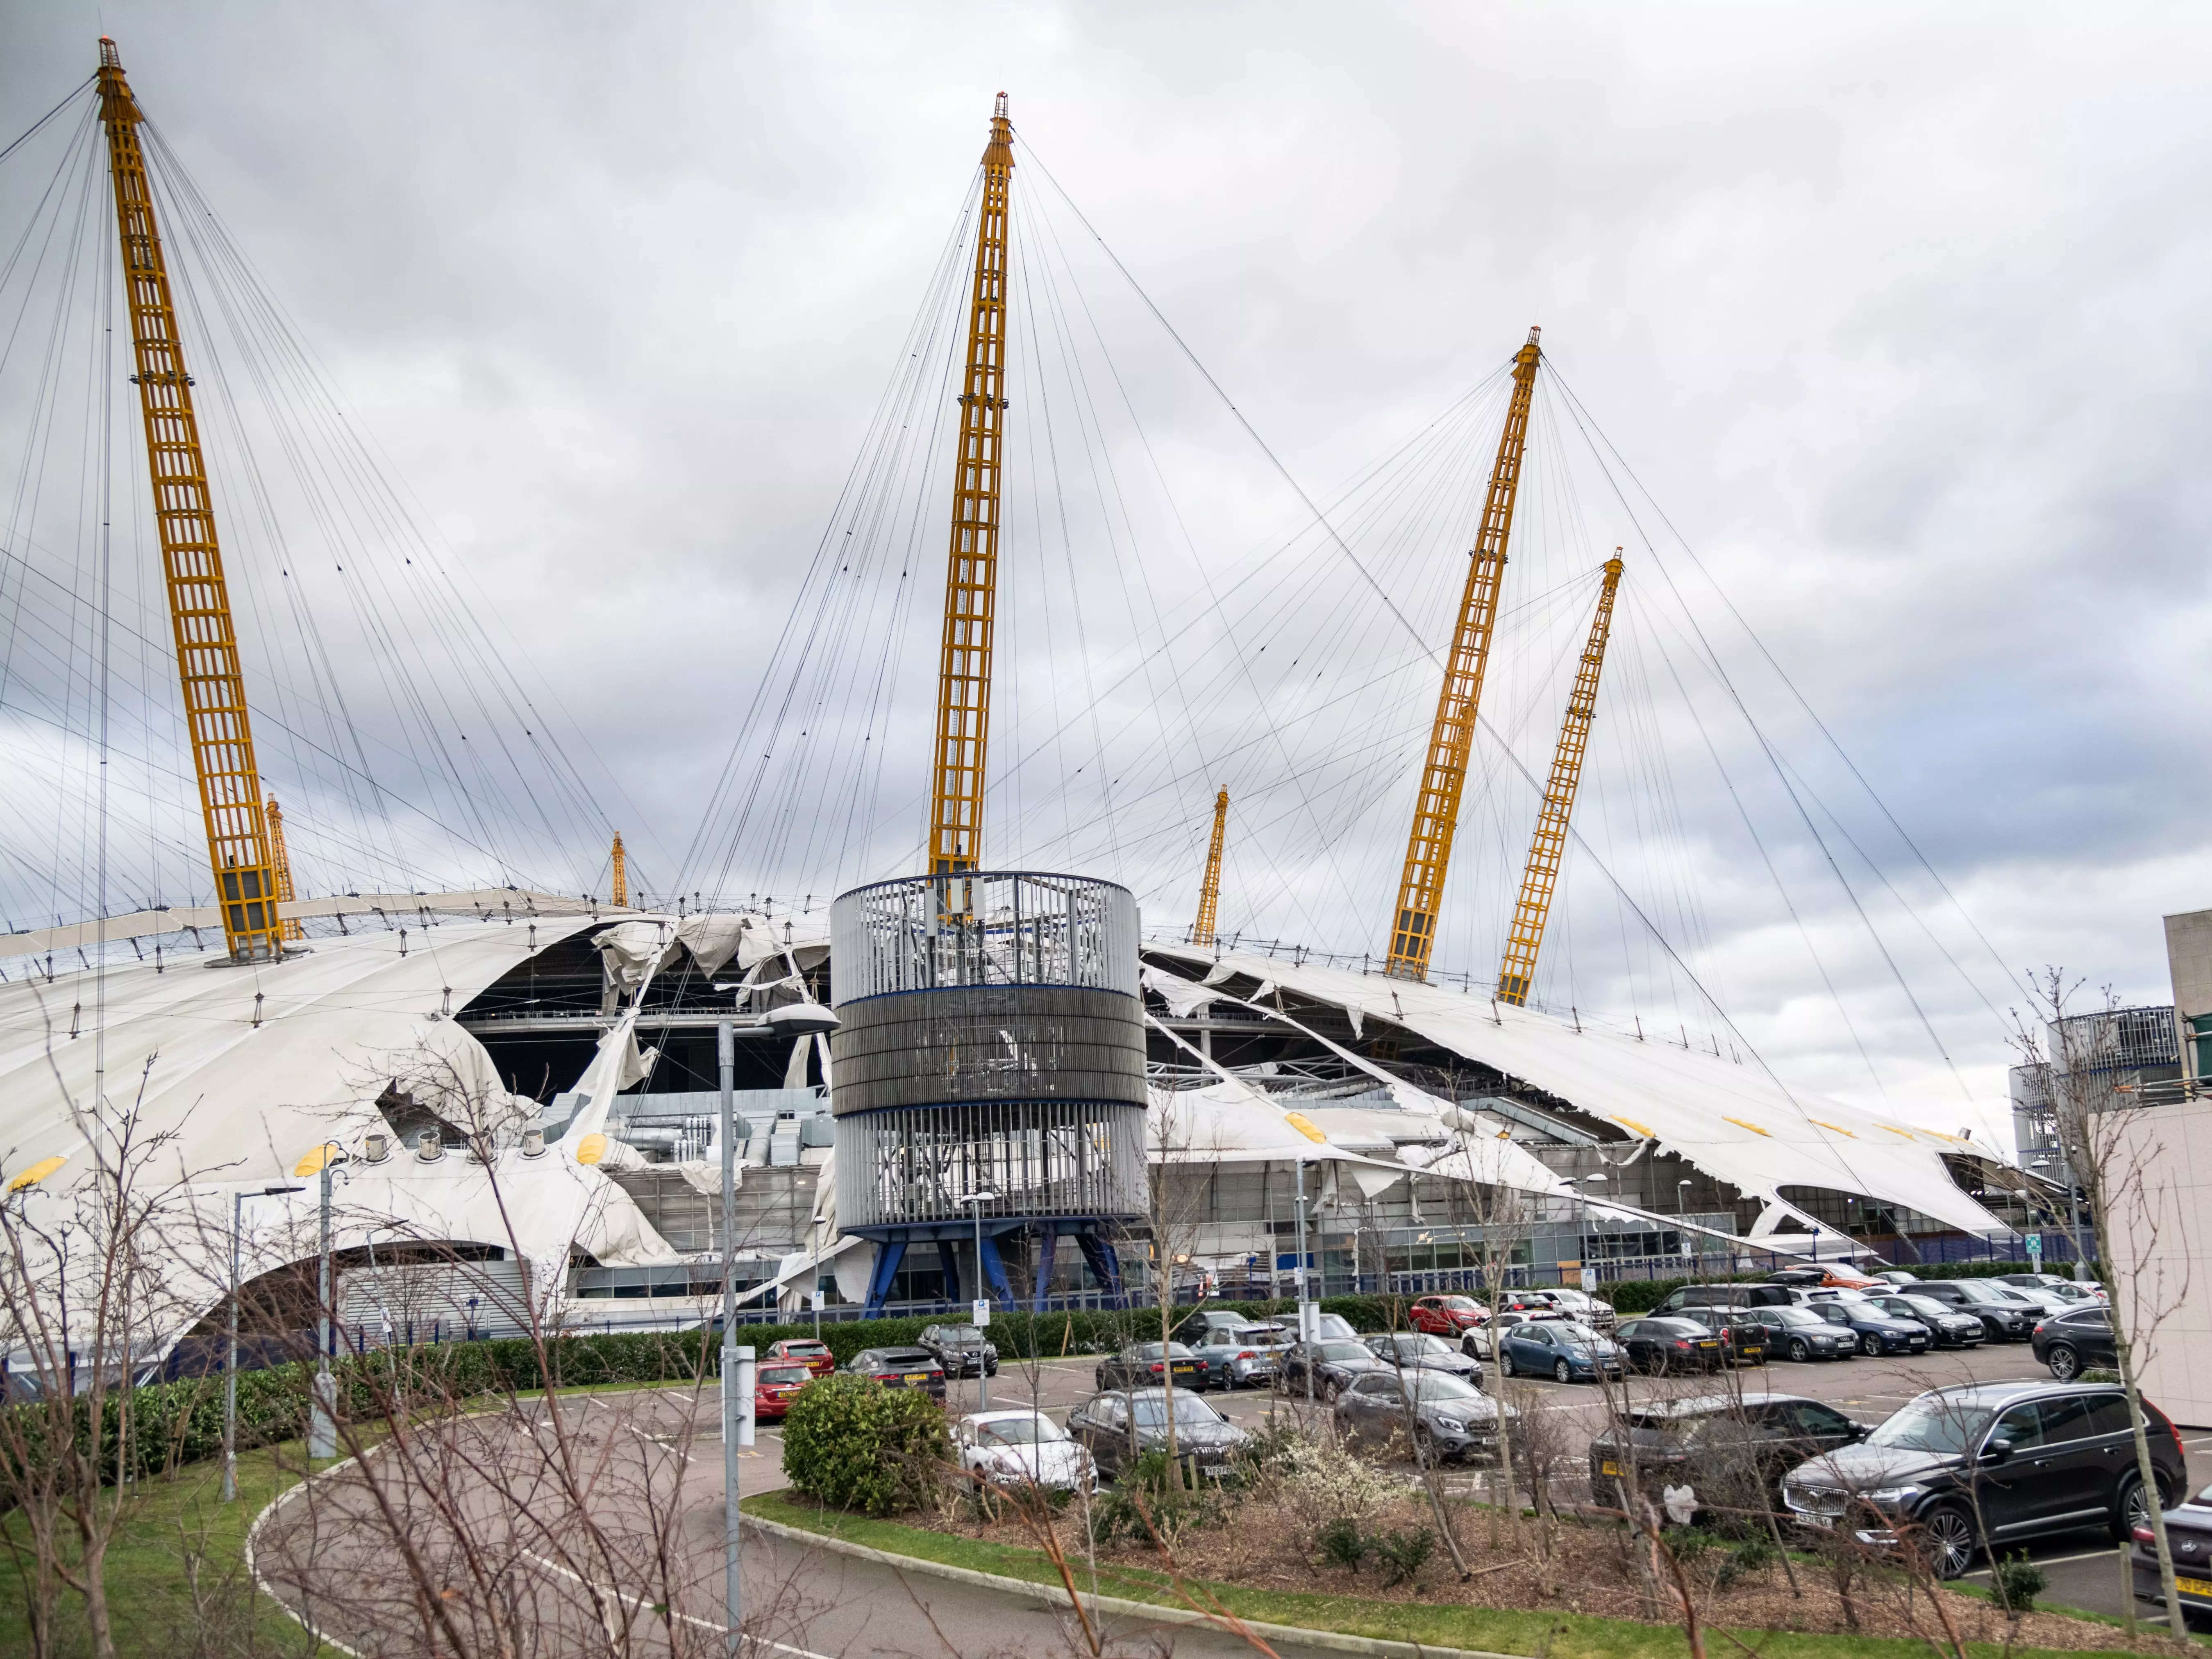 General view of the damage caused by heavy winds that tore open the famous canopy roof of the O2 Arena in Greenwich causing widespread damage on February 18, 2022 in London, England.